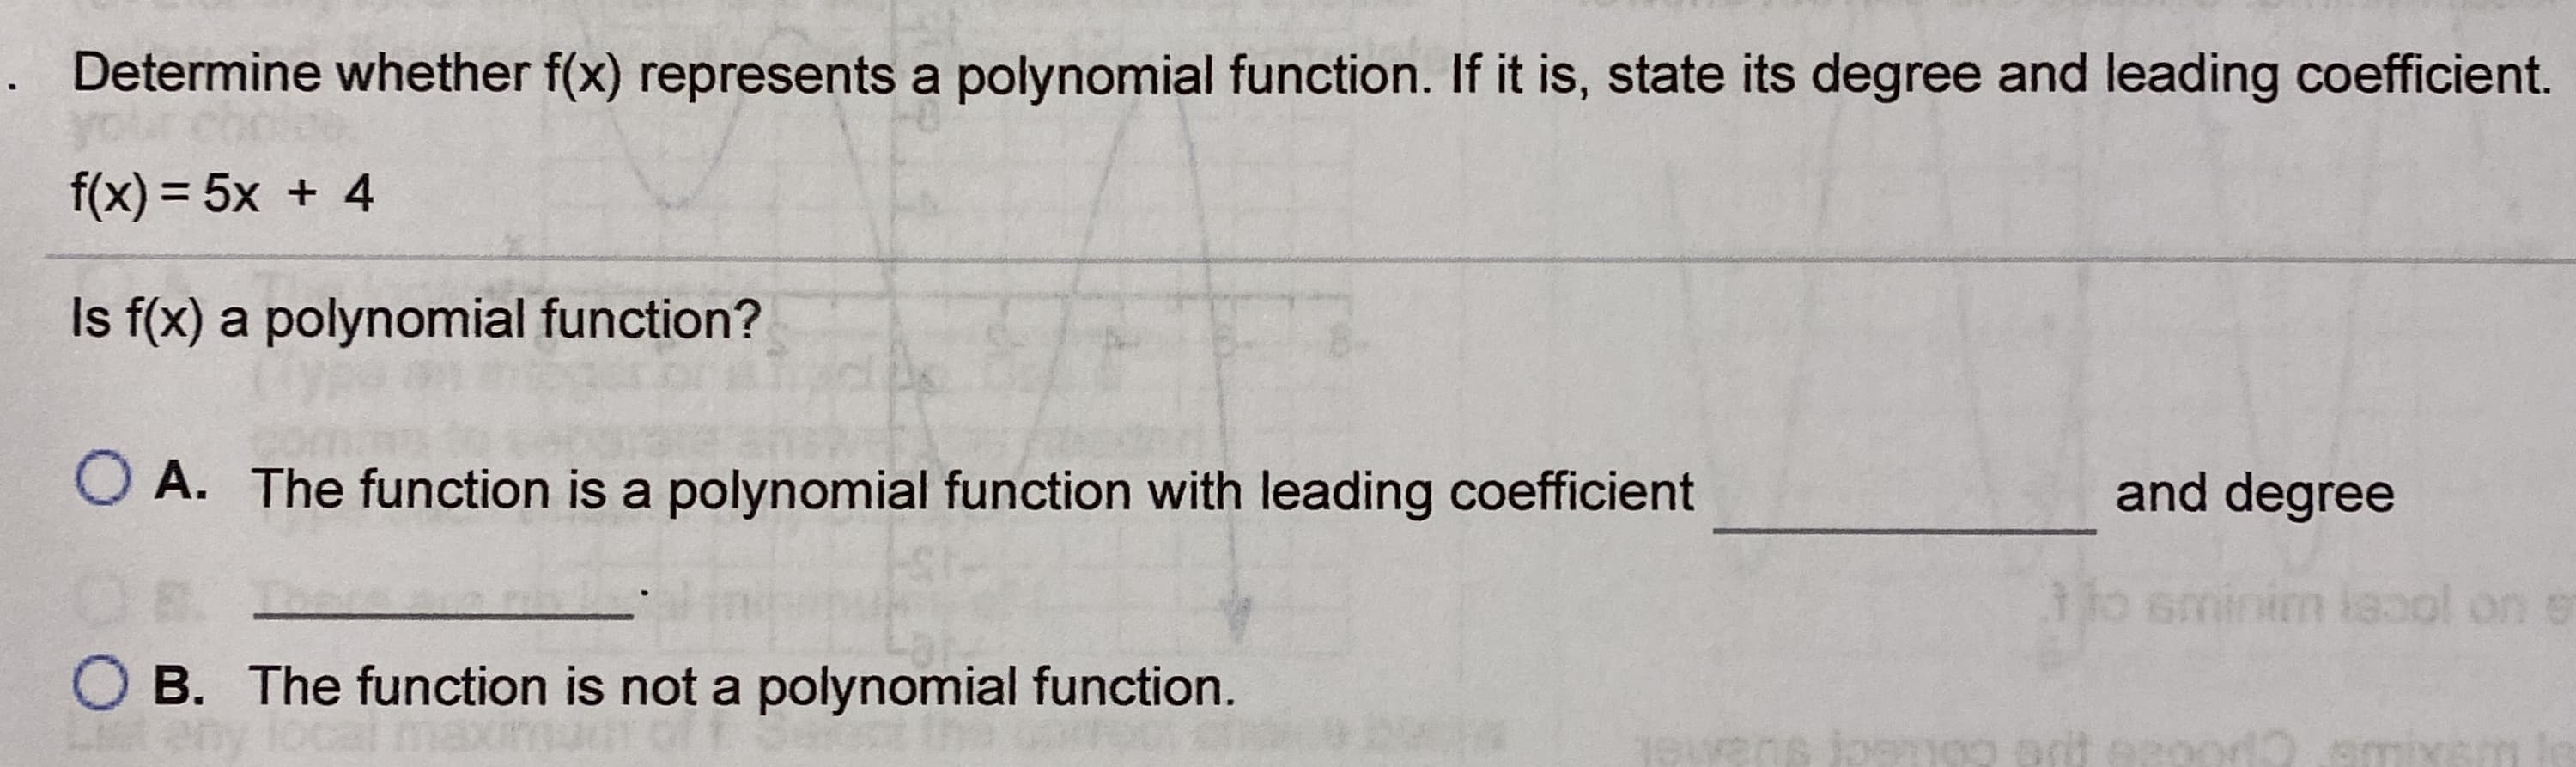 Determine whether f(x) represents a polynomial function. If it is, state its degree and leading coefficient.
f(x) = 5x + 4
Is f(x) a polynomial function?
O A. The function is a polynomial function with leading coefficient
and degree
minim isool on s
O B. The function is not a polynomial function.
